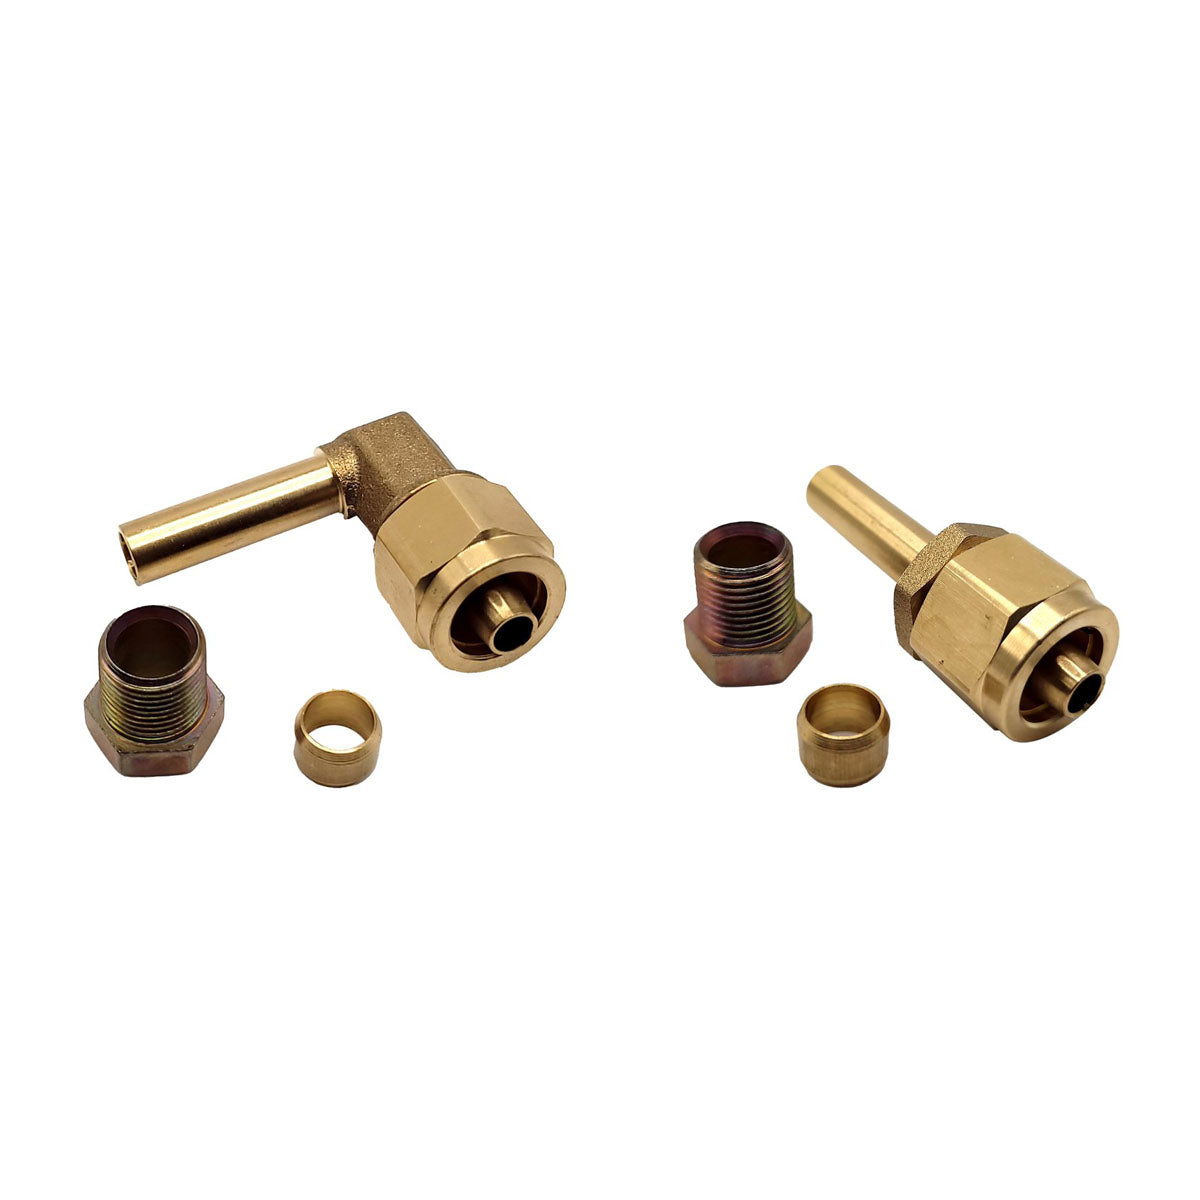 8mm COPPER COMPRESSION FITTING to 1/2 BSP MALE THREAD ADAPTOR PIPE FITTING  LPG